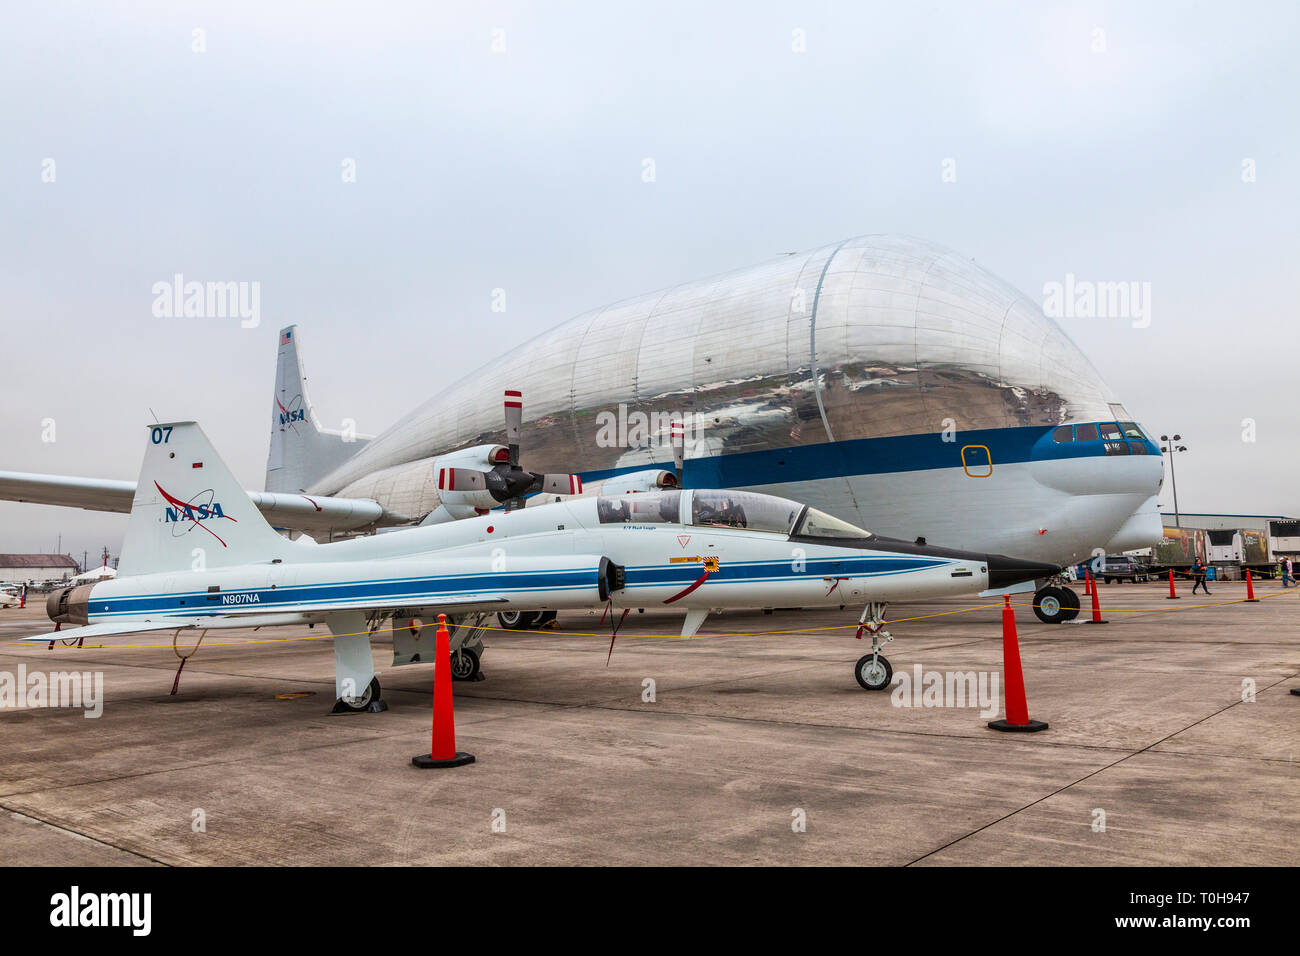 NASA Super Guppy Turbine cargo plane and NASA T-38 Talon at 2018 Wings over Houston Air Show in Houston, Texas. Blue Angels Airshow. Stock Photo